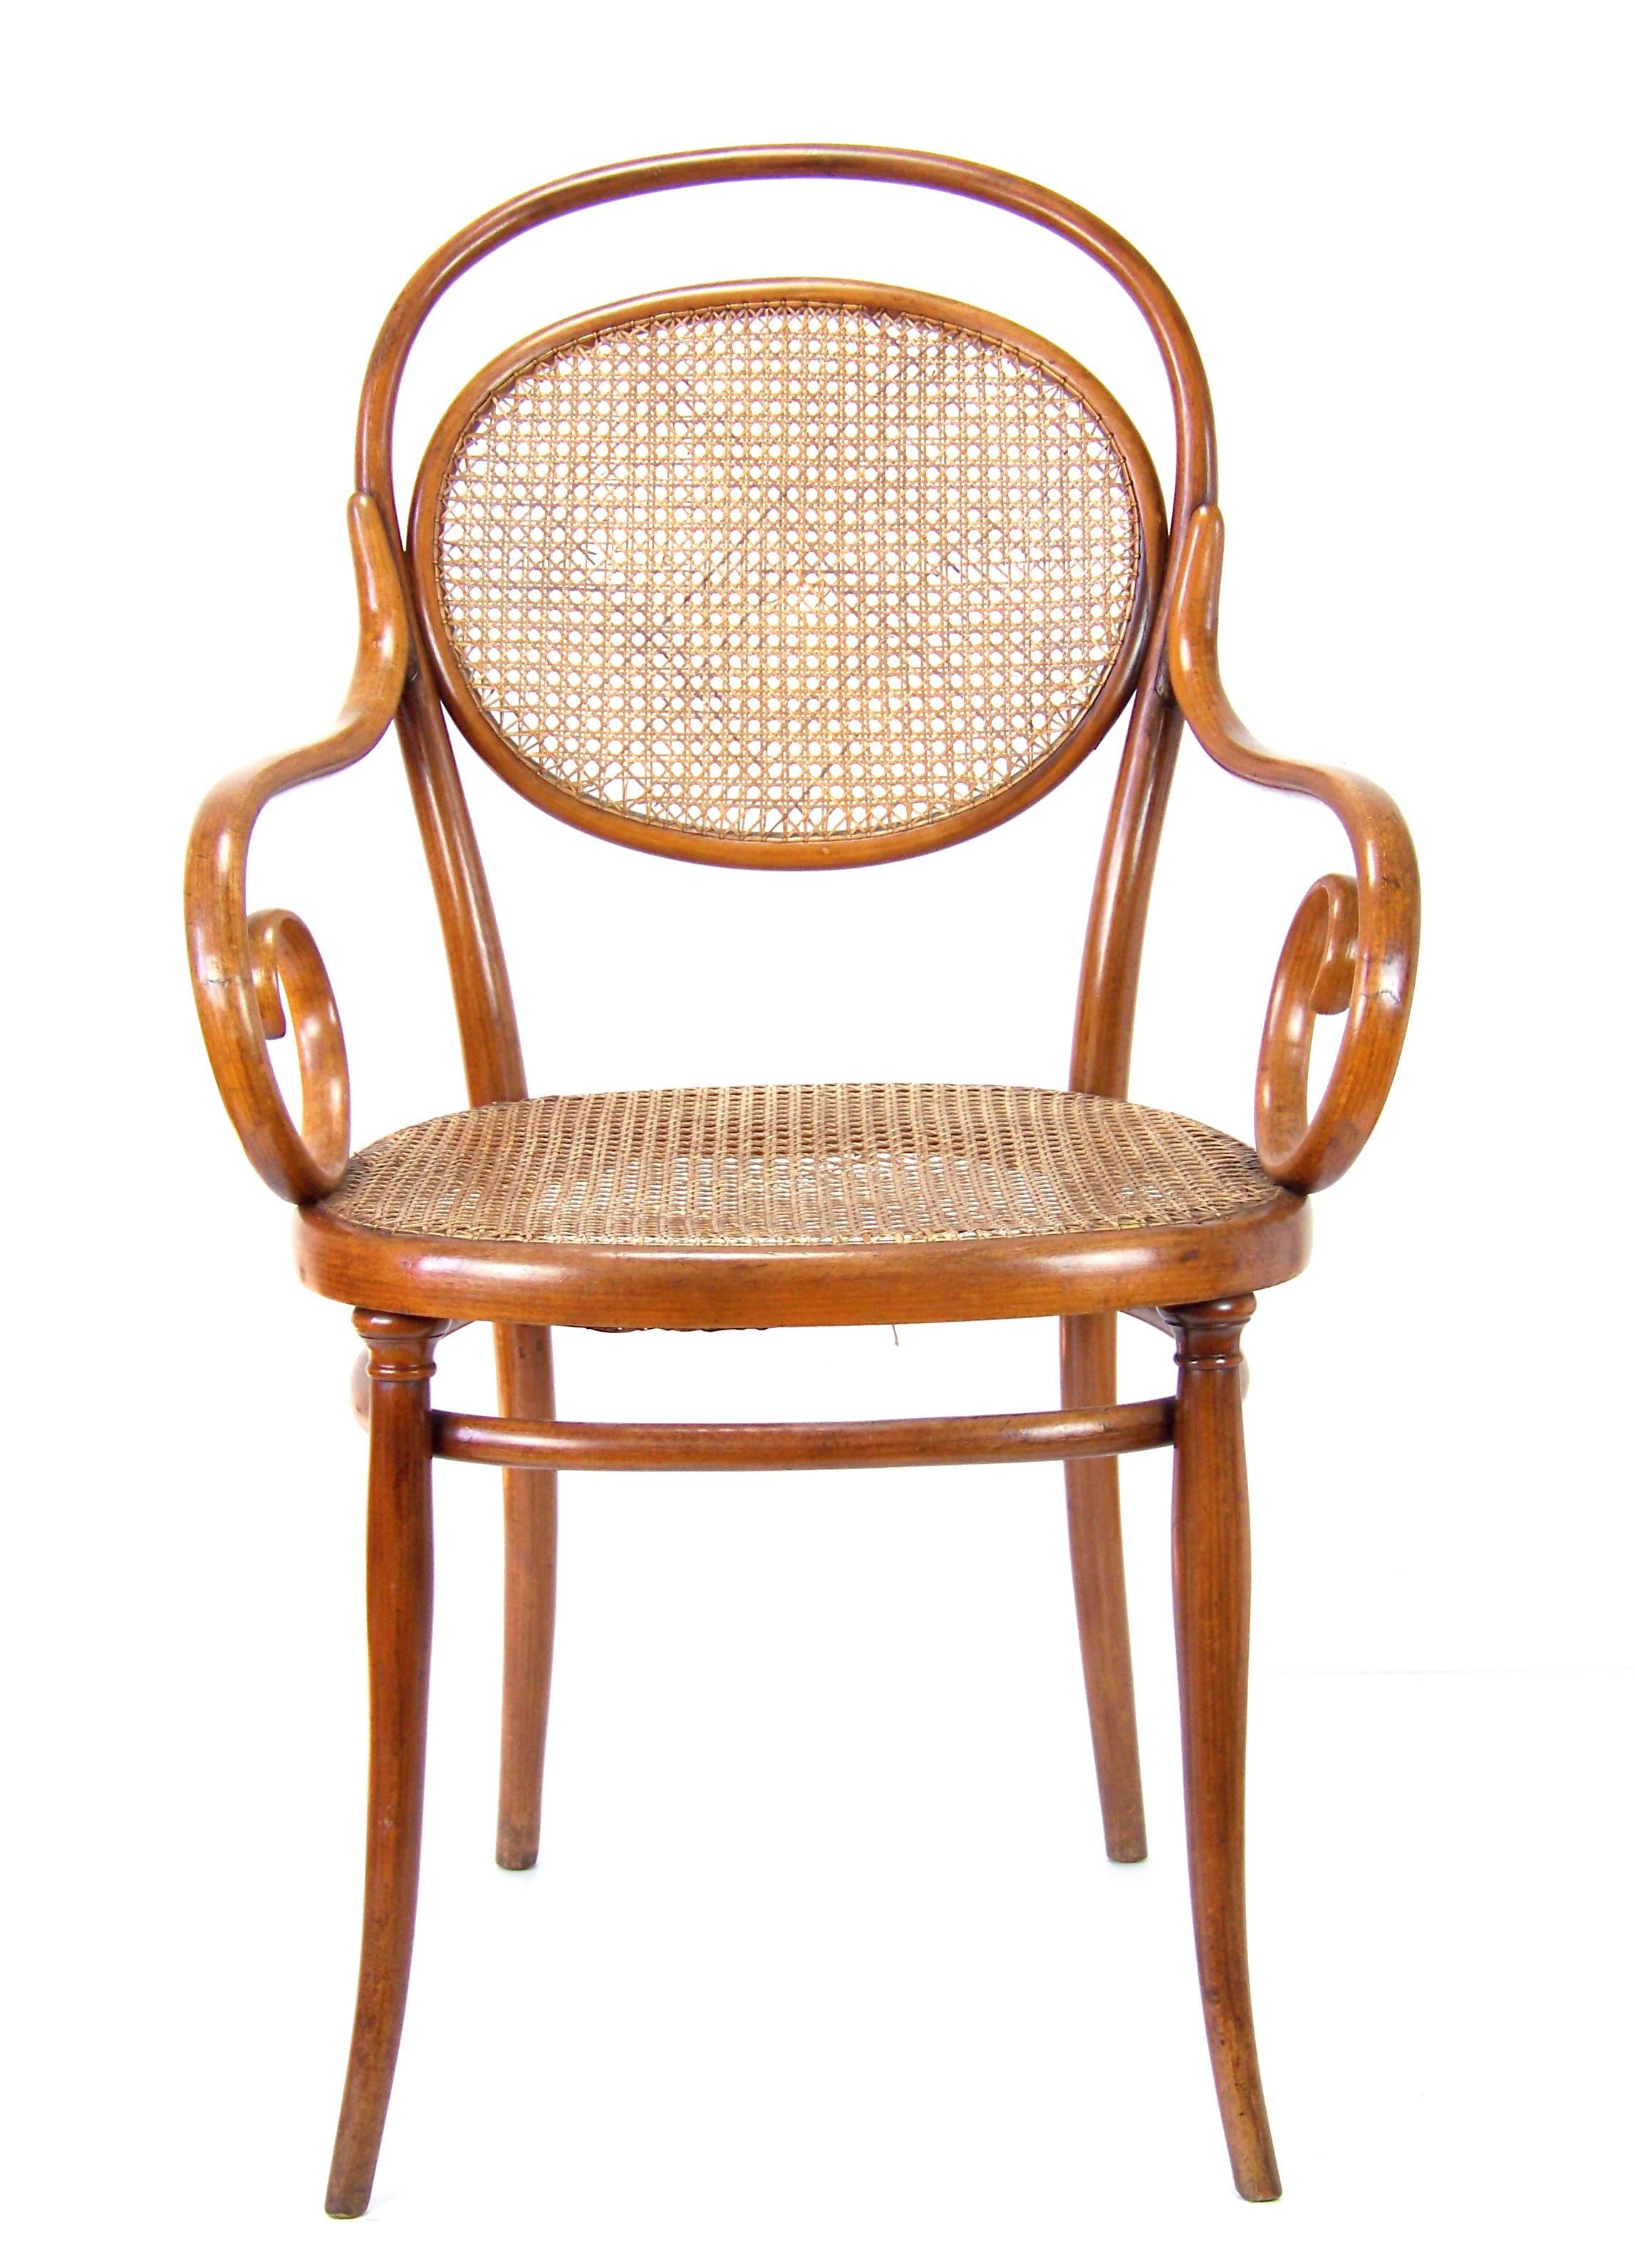 Manufactured in Austria by the Gebrüder Thonet Company. Marked with paper label 